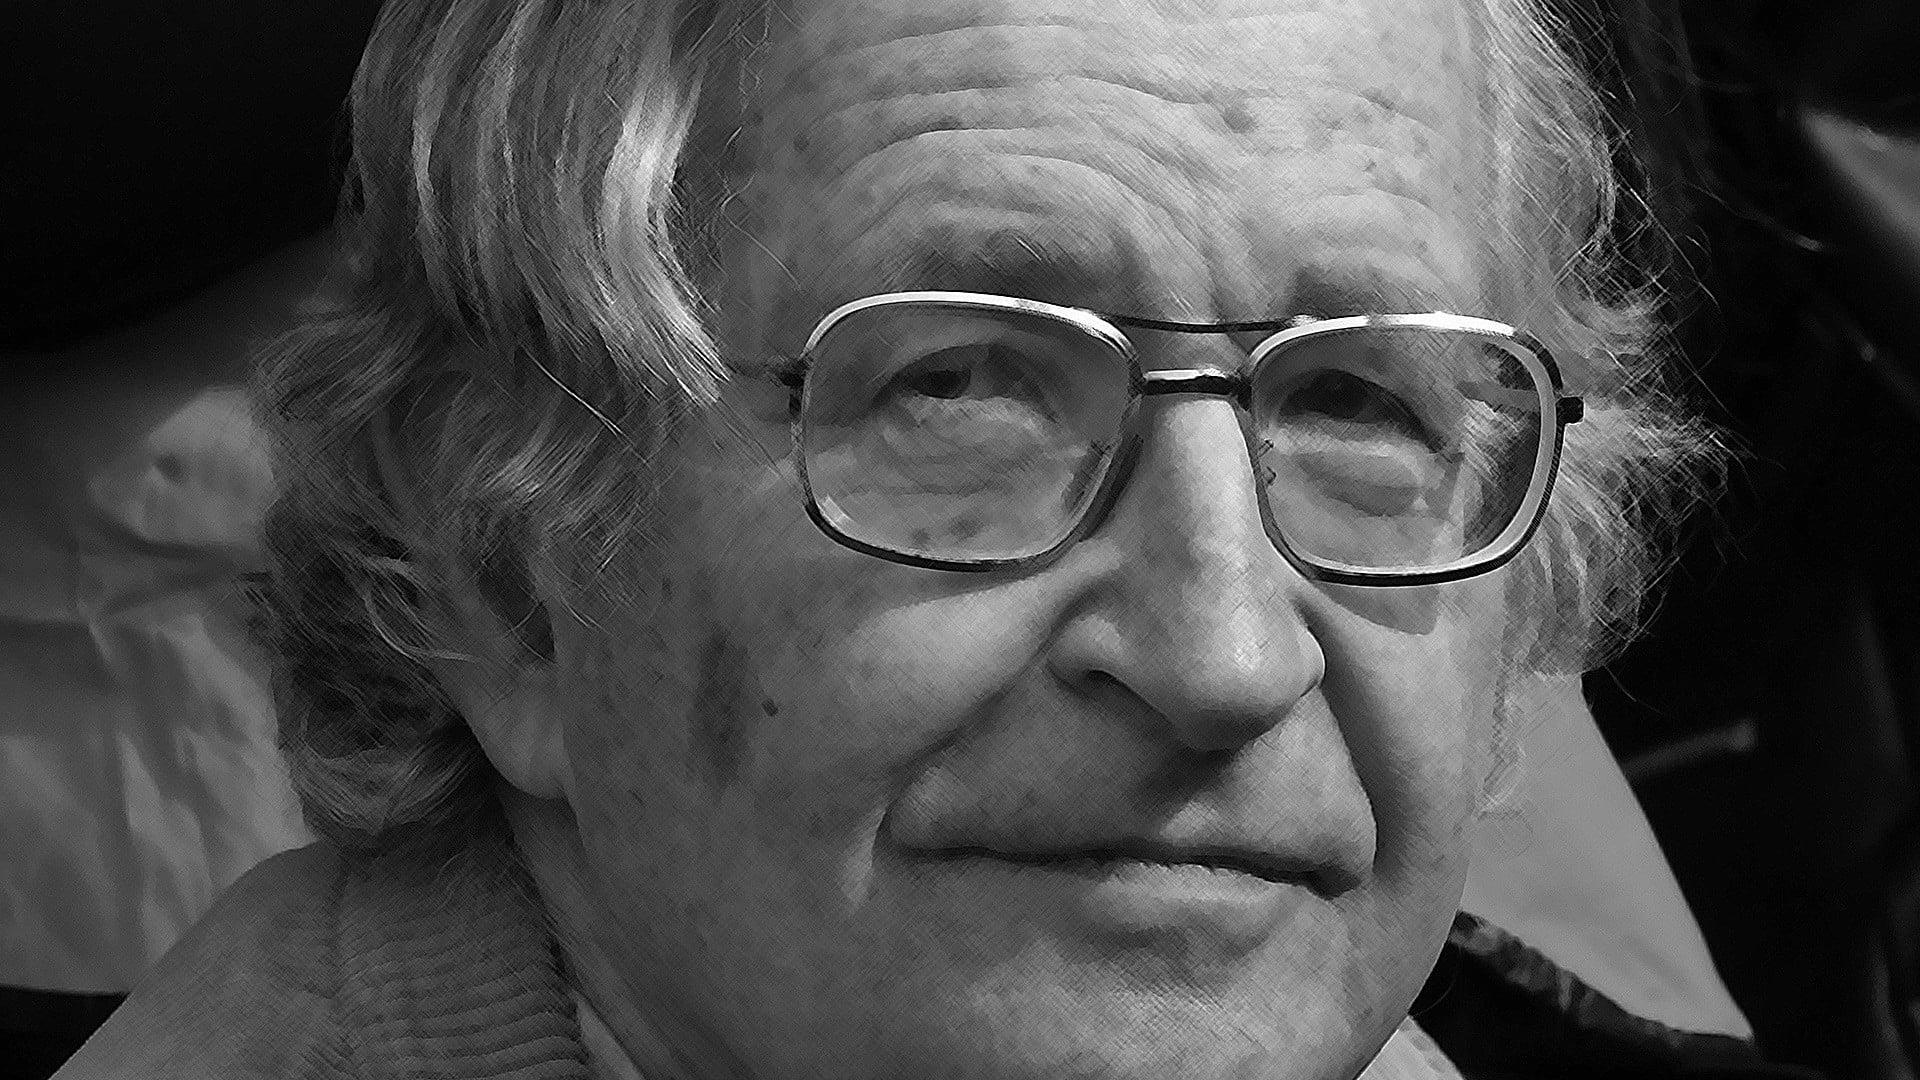 Manufacturing Consent: Noam Chomsky and the Media backdrop